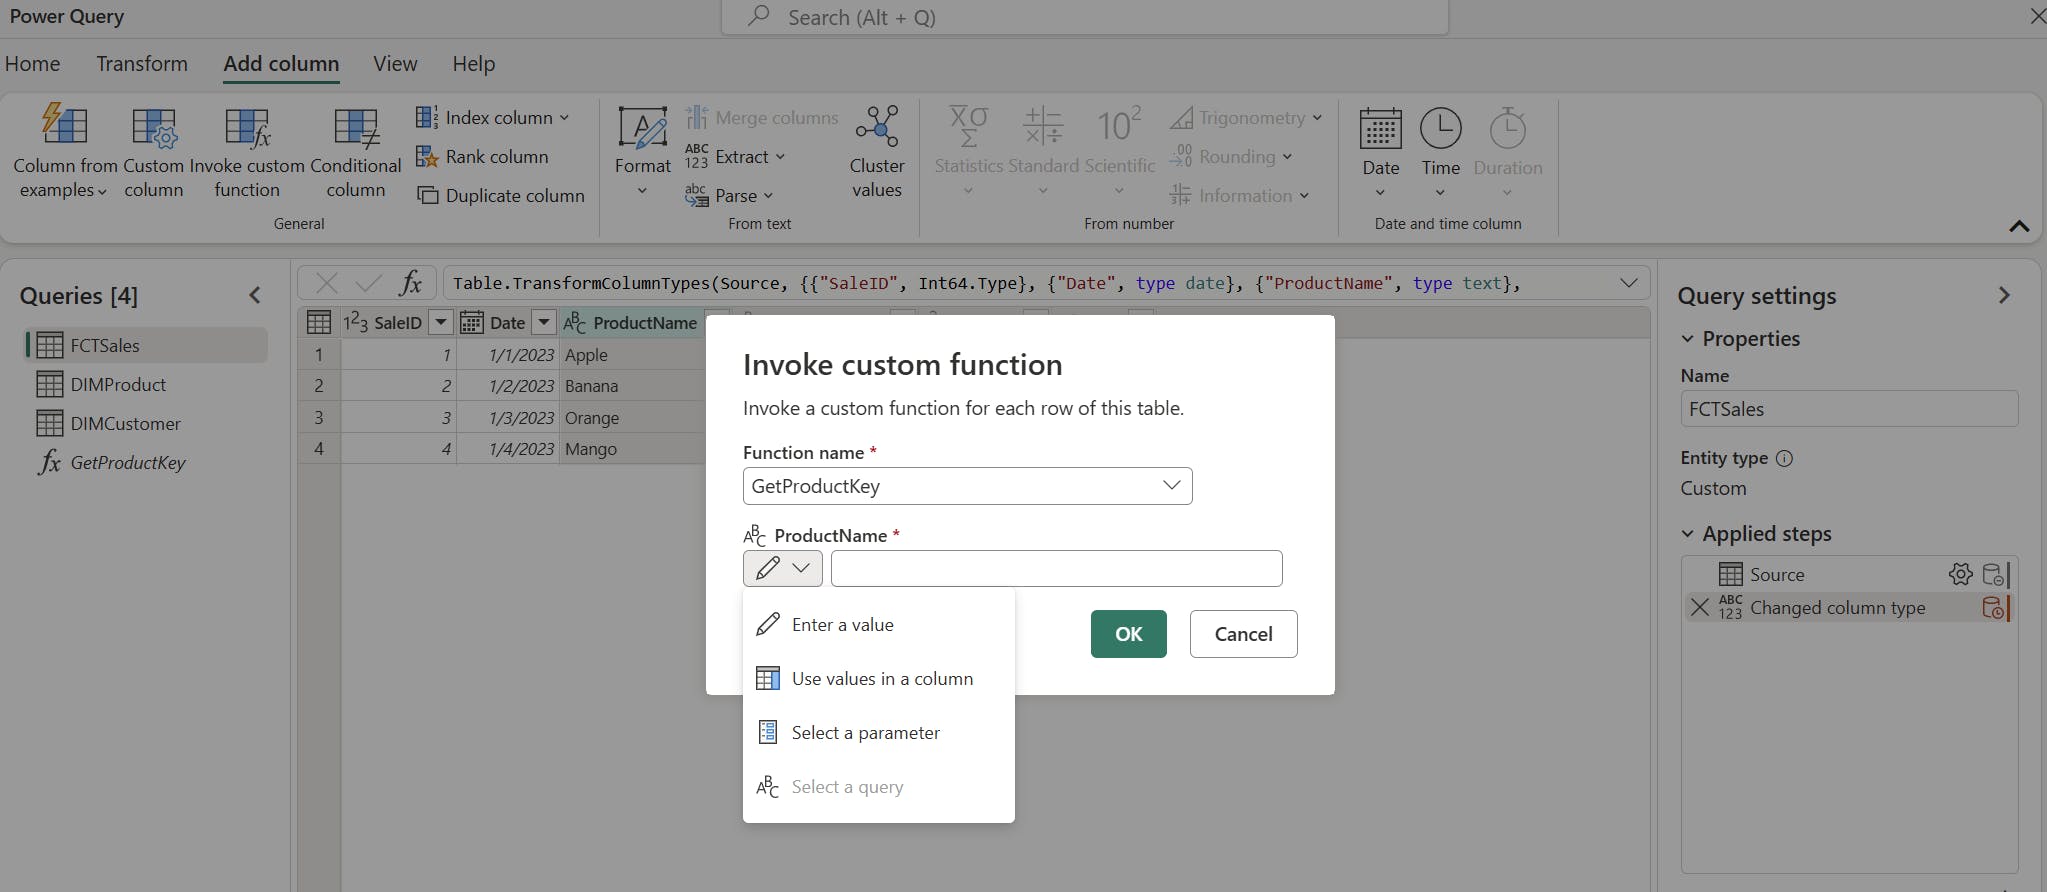 A screenshot of Power Query in Microsoft Fabric. The "Invoke custom function" dialog box is open, with fields for "Function name" and "ProductName." The drop-down menu under "ProductName" displays options such as "Enter a value," "Use values in a column," "Select a parameter," and "Select a query." The background shows a data table with columns for "SaleID," "Date," and "ProductName," containing items like Apple, Banana, Orange, and Mango. The Queries pane lists FCTSales, DIMProduct, DIMCustomer, and GetProductKey. The Query settings pane shows the name "FCTSales" and applied steps including "Source" and "Changed column type."